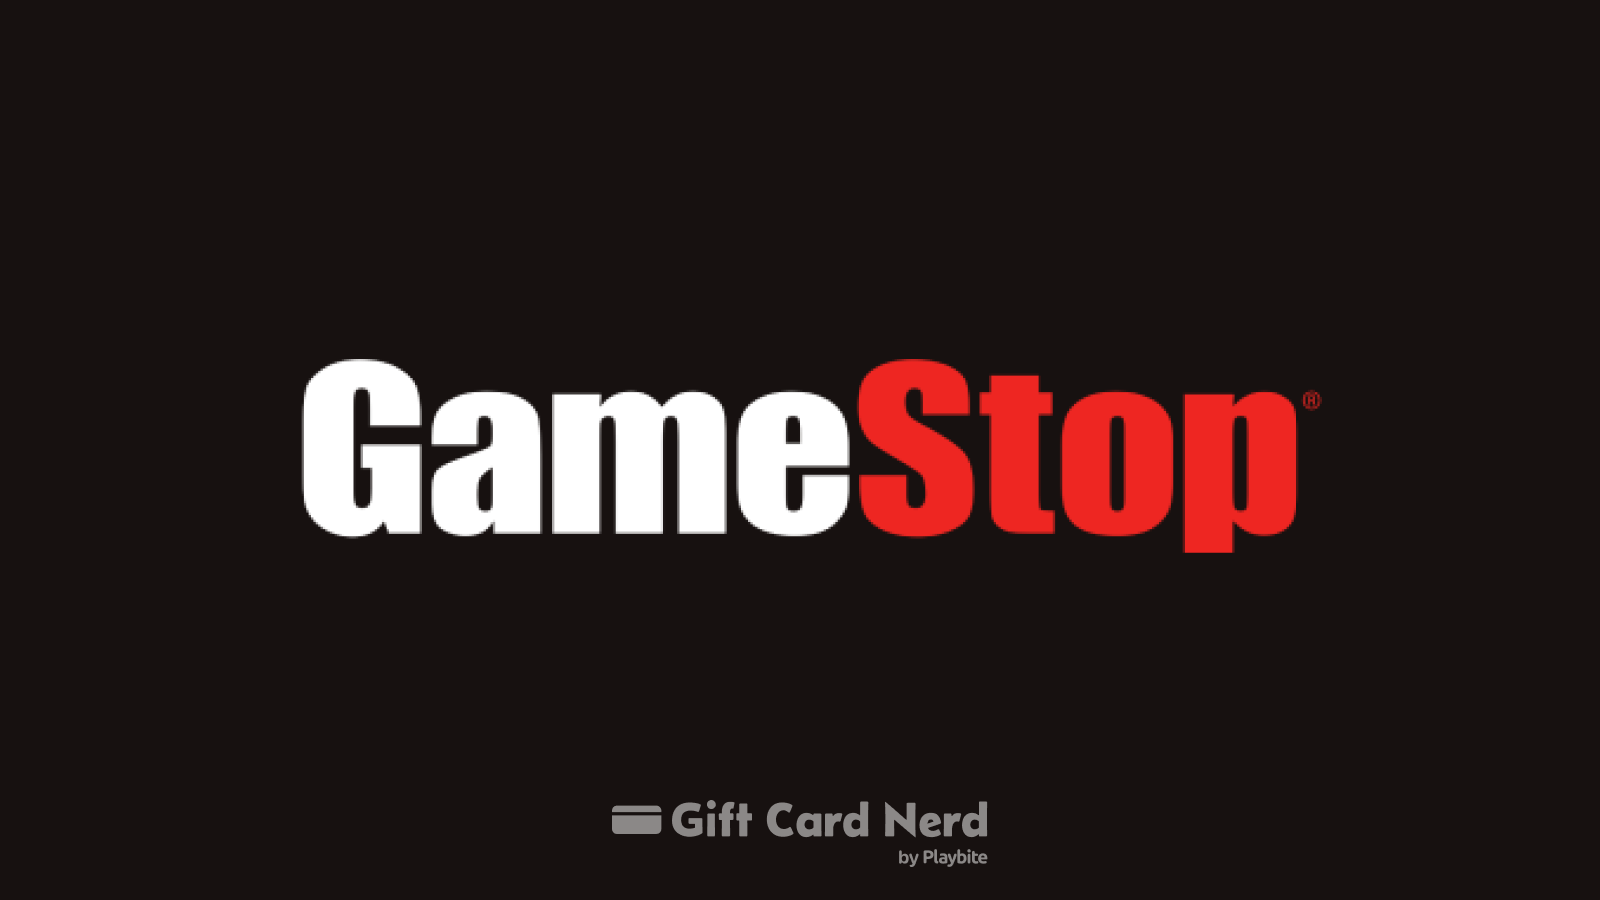 Can I Use a GameStop Gift Card on Cash App?